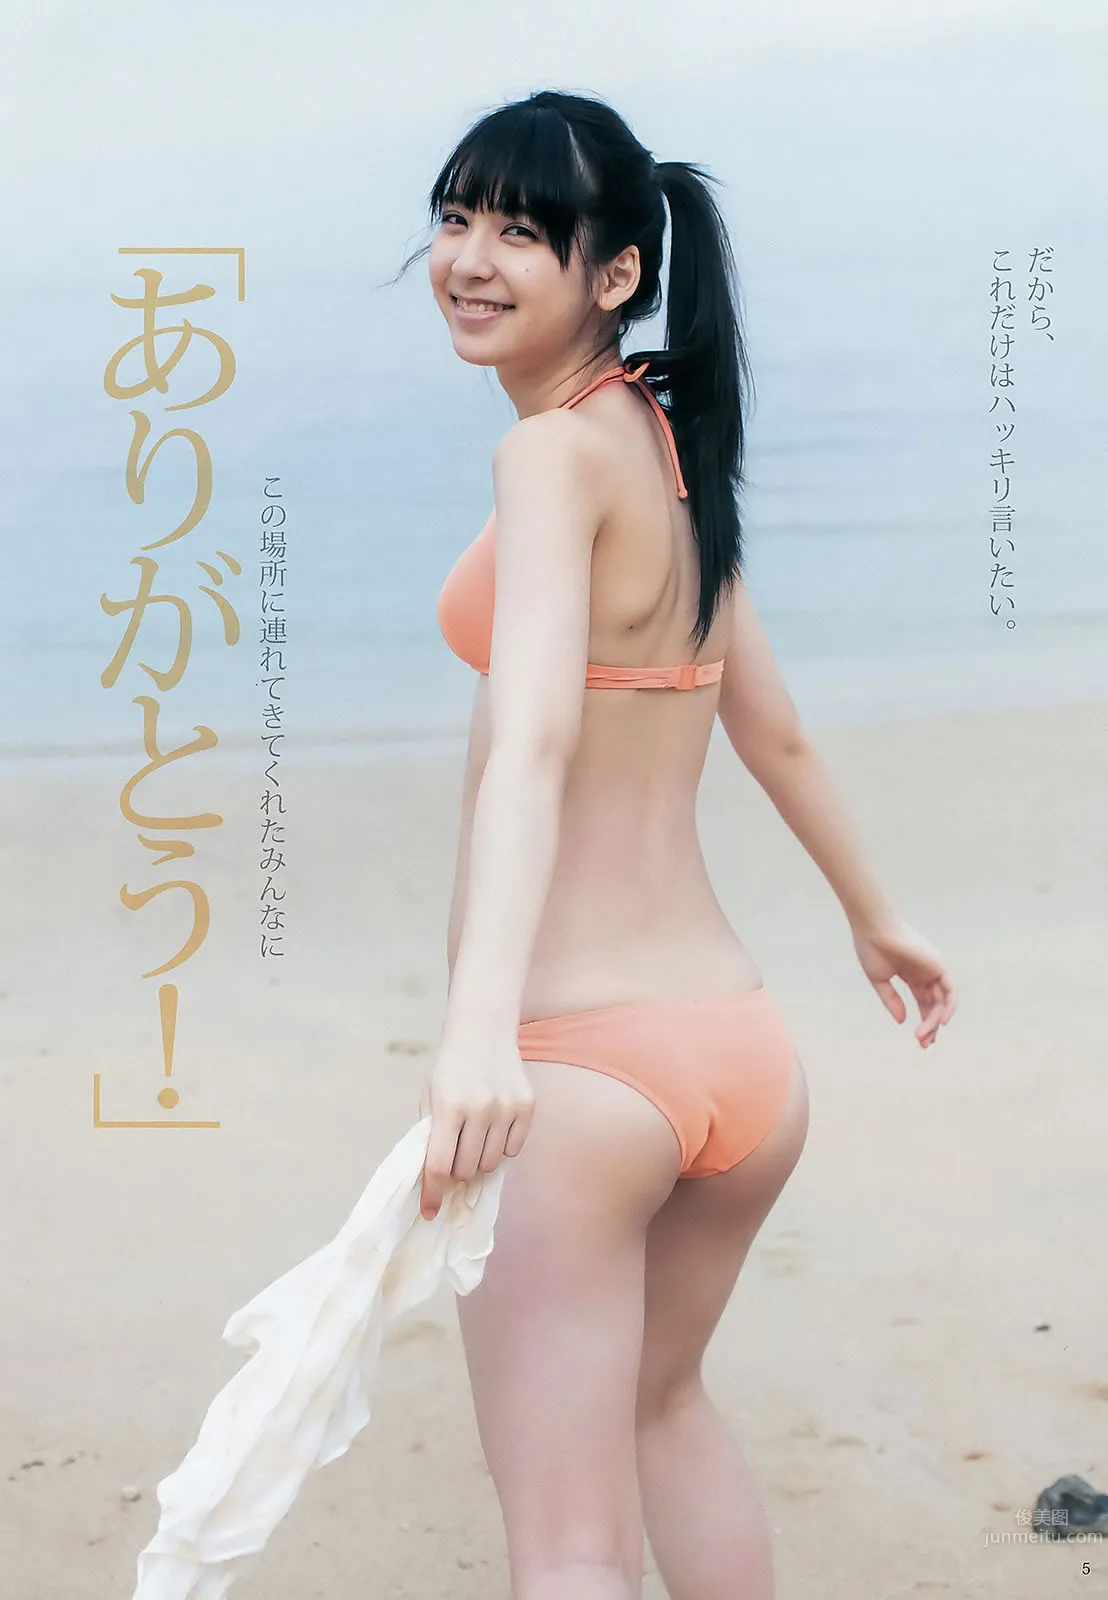 [Weekly Young Jump] 2015 No.42-43 佐藤美希 伊藤しほ乃 松岡菜摘 太田夢莉_11